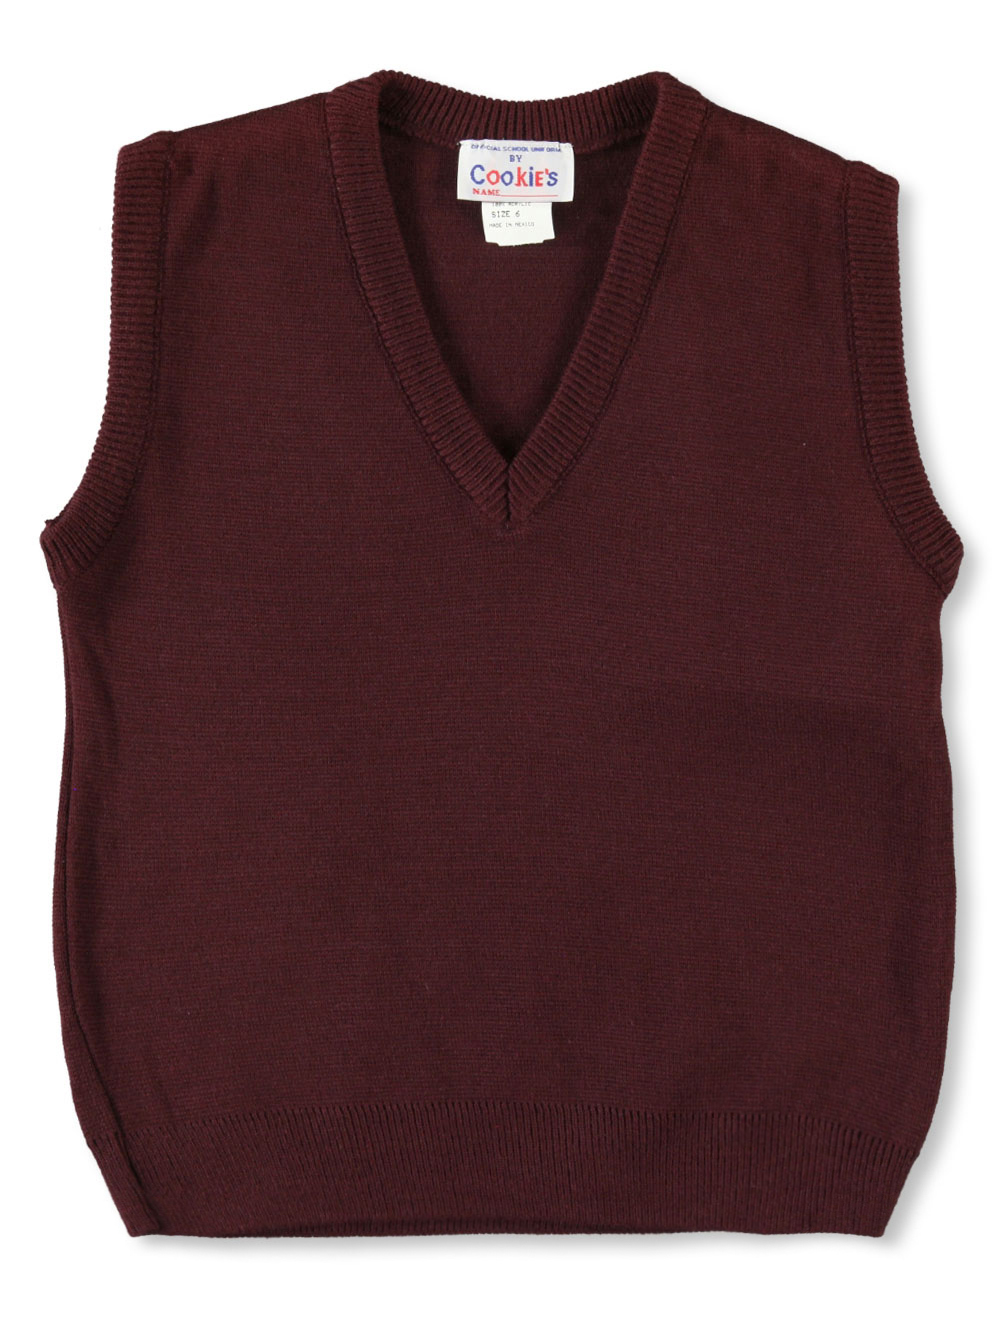 Size 18 Sweatersvests for Girls